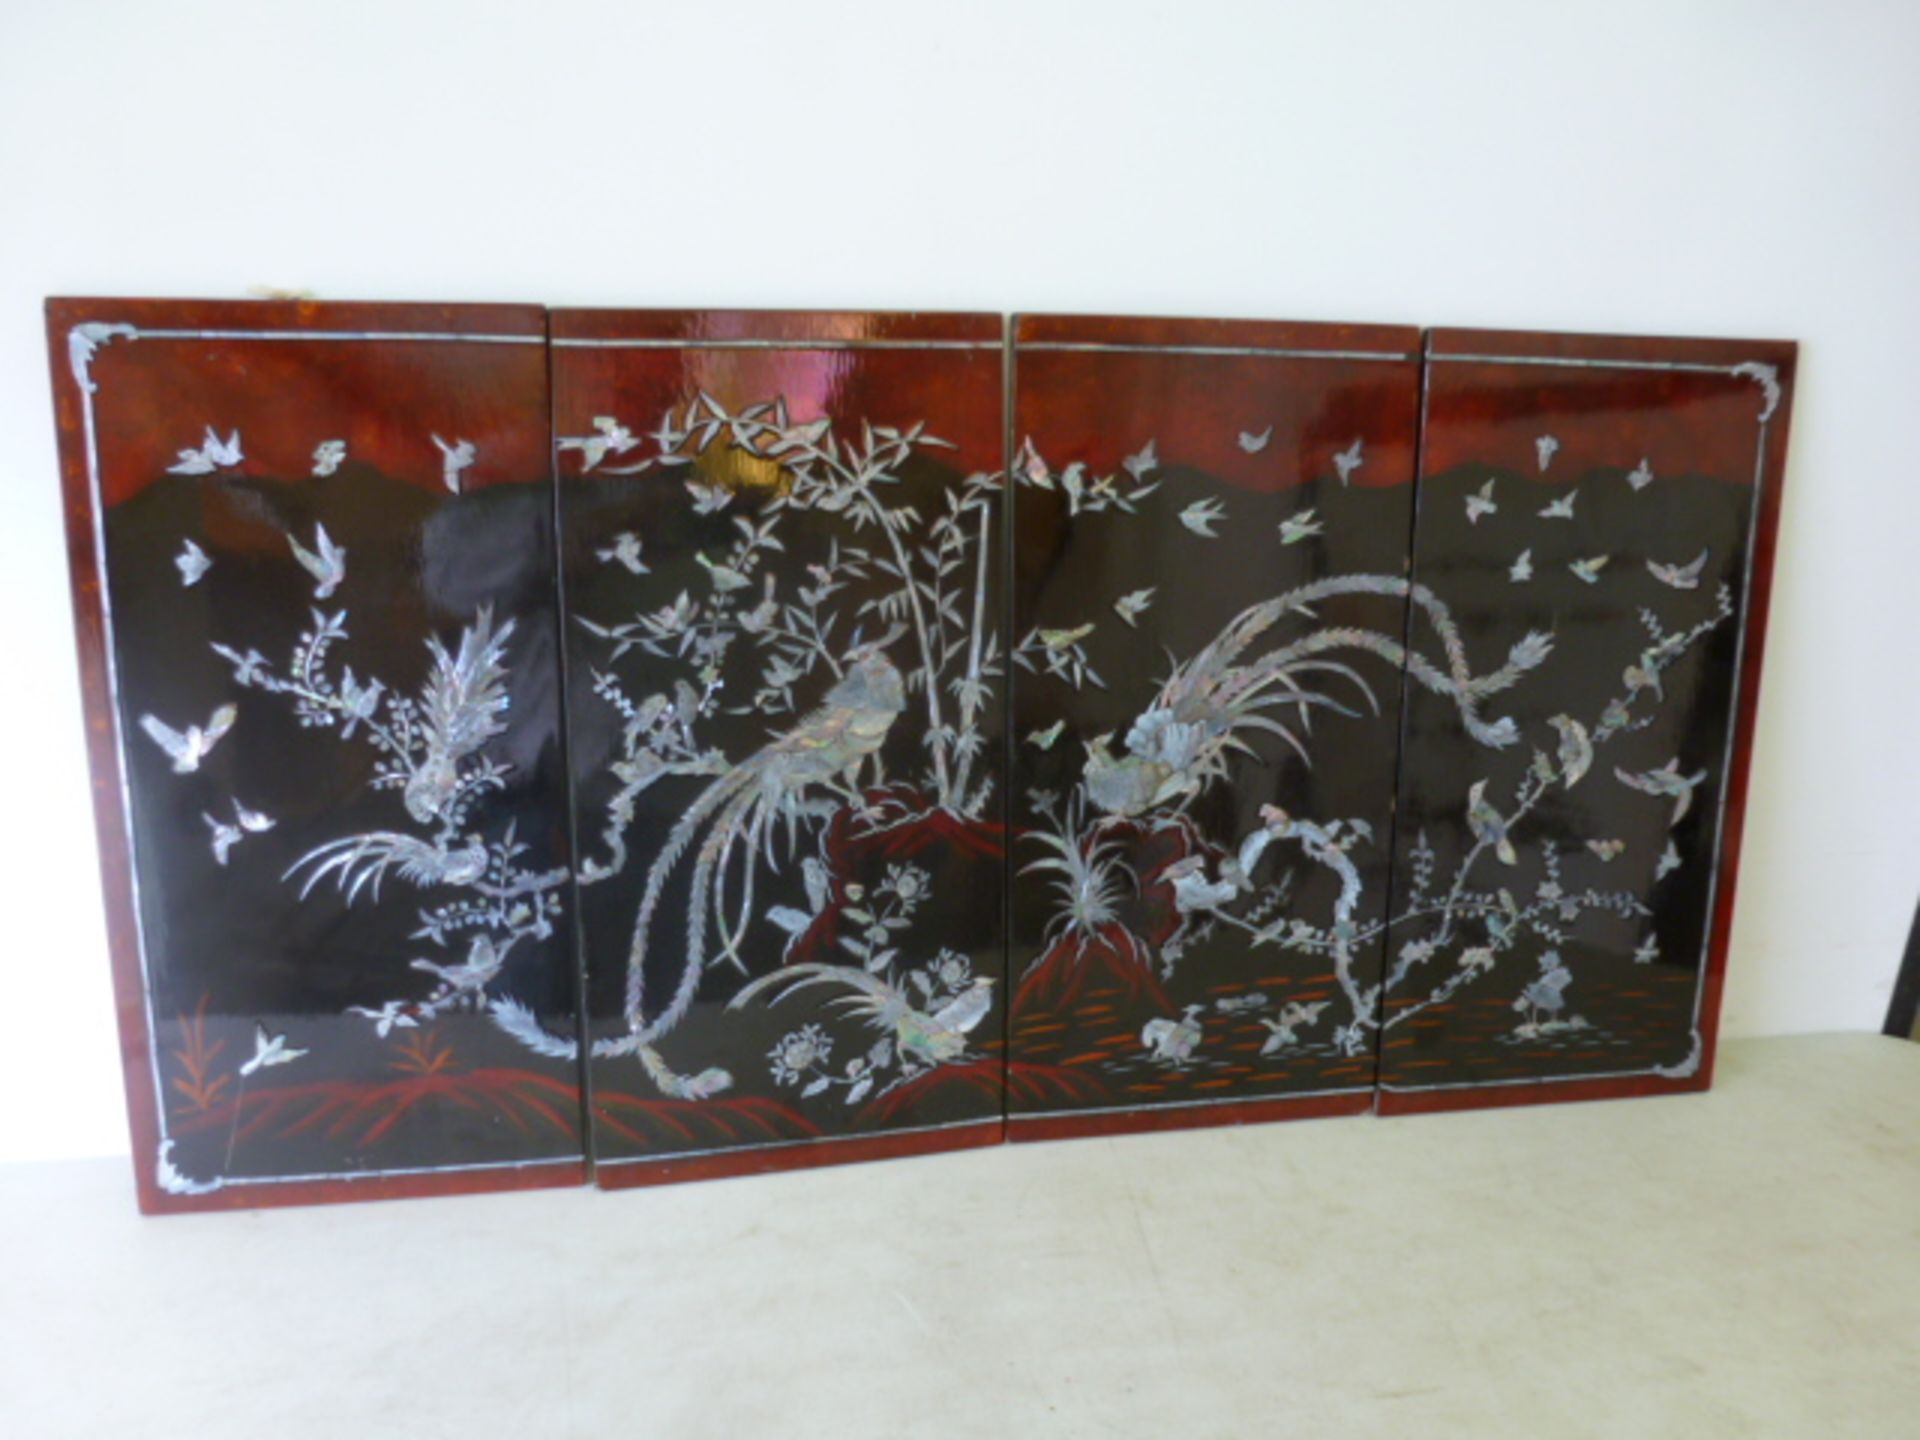 4 Oriental Wooden Panels with Marquetry Inlay Appears to be Mother of Pearle. Depicting a Scene of